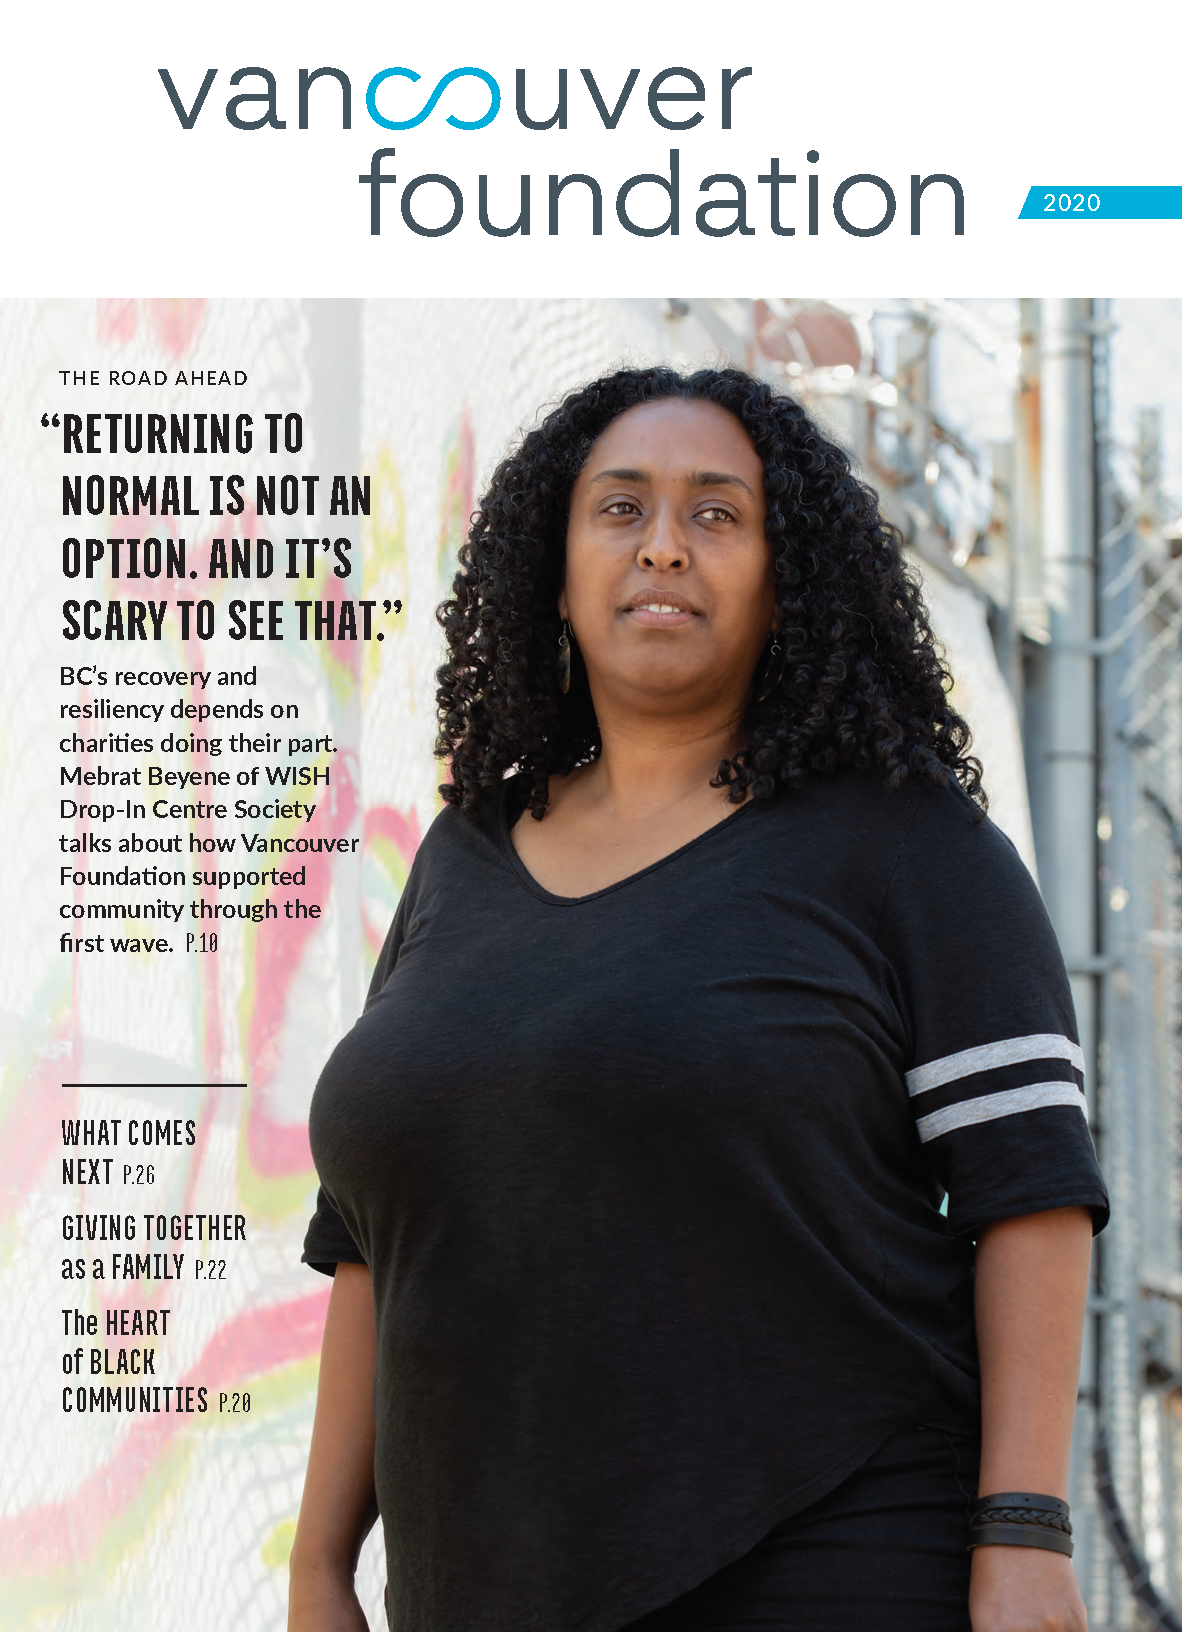 2020 Vancouver Foundation cover featuring Mebrat Beyane, who has dark skin and shoulder-length curly hair, standing in a black T-shirt. "Returning to normal is not an option. And it's scary to see that."